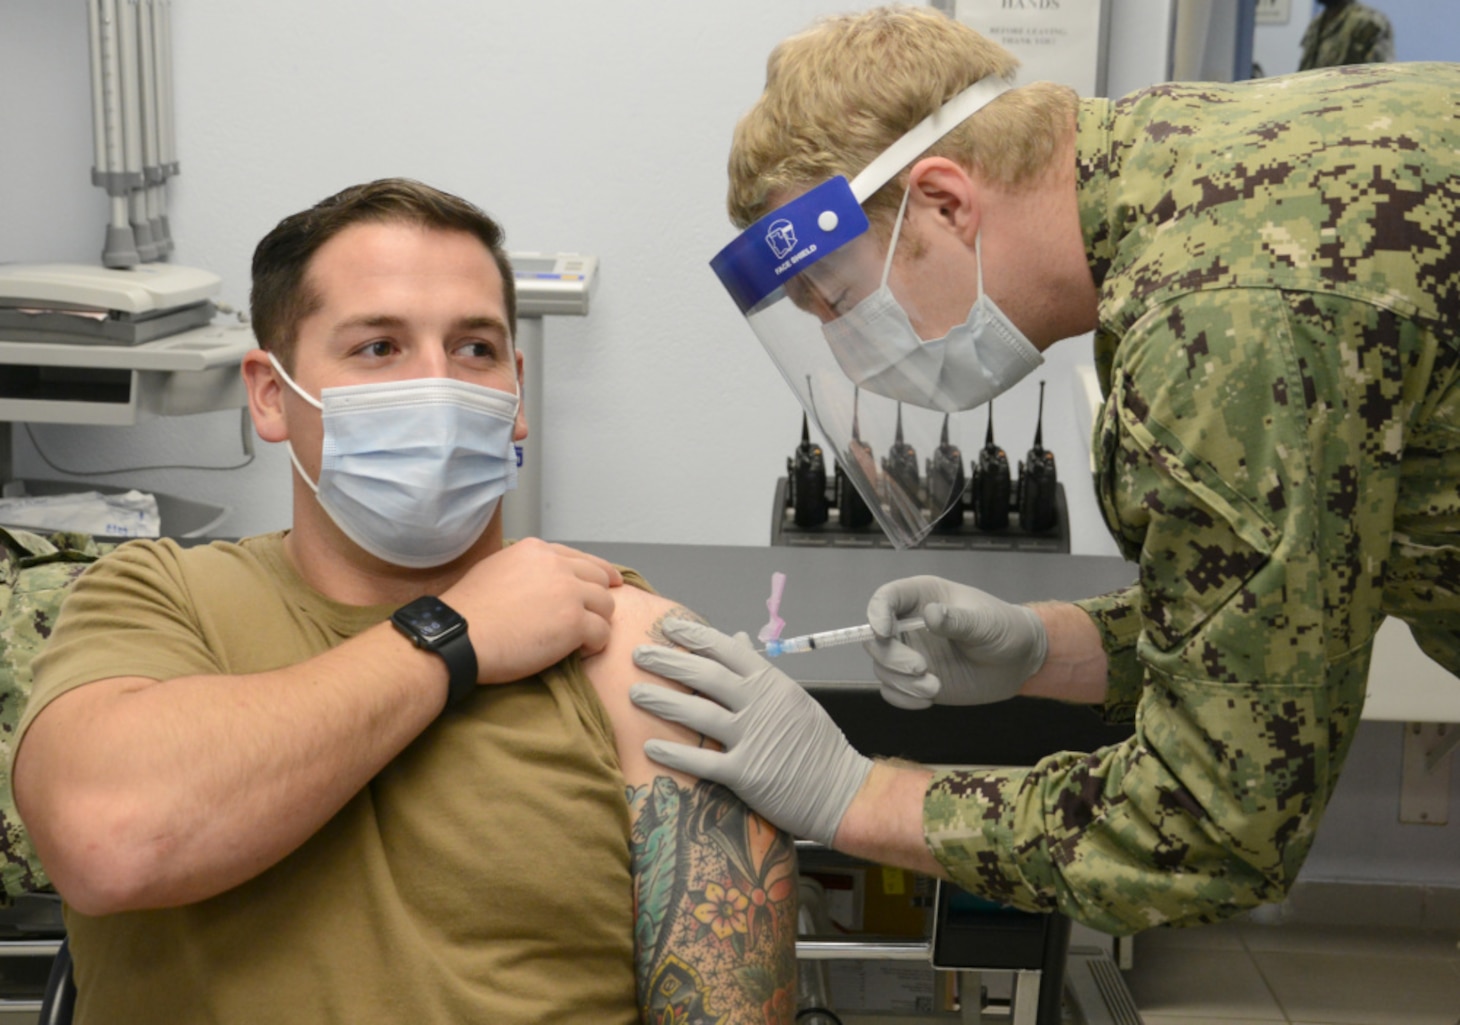 210111-N-AZ866-0130 NAVAL SUPPORT ACTIVITY SOUDA BAY, Greece (Jan. 11, 2021)

Hospital Corpsman 3rd Class Zak McBride receives the Moderna COVID-19 vaccine from Hospital Corpsman 3rd Class Caleb Newbill at the Branch Health Clinic Souda Bay, Jan. 11, 2021. The vaccine is being administered in phases based on DoD priority levels to reduce the burden of COVID-19 in high-risk populations and simultaneously mitigate risk to military operations. McBride a native of Ellington, Conn. Newbill is a native of Covington, Tenn. NSA Souda Bay is an operational ashore base that enables U.S., allied, and partner nation forces to be where they are needed when they are needed to ensure security and stability in Europe, Africa, and Southwest Asia. (U.S. Navy photo by Mass Communication Specialist 2nd Class Kelly M. Agee/Released)